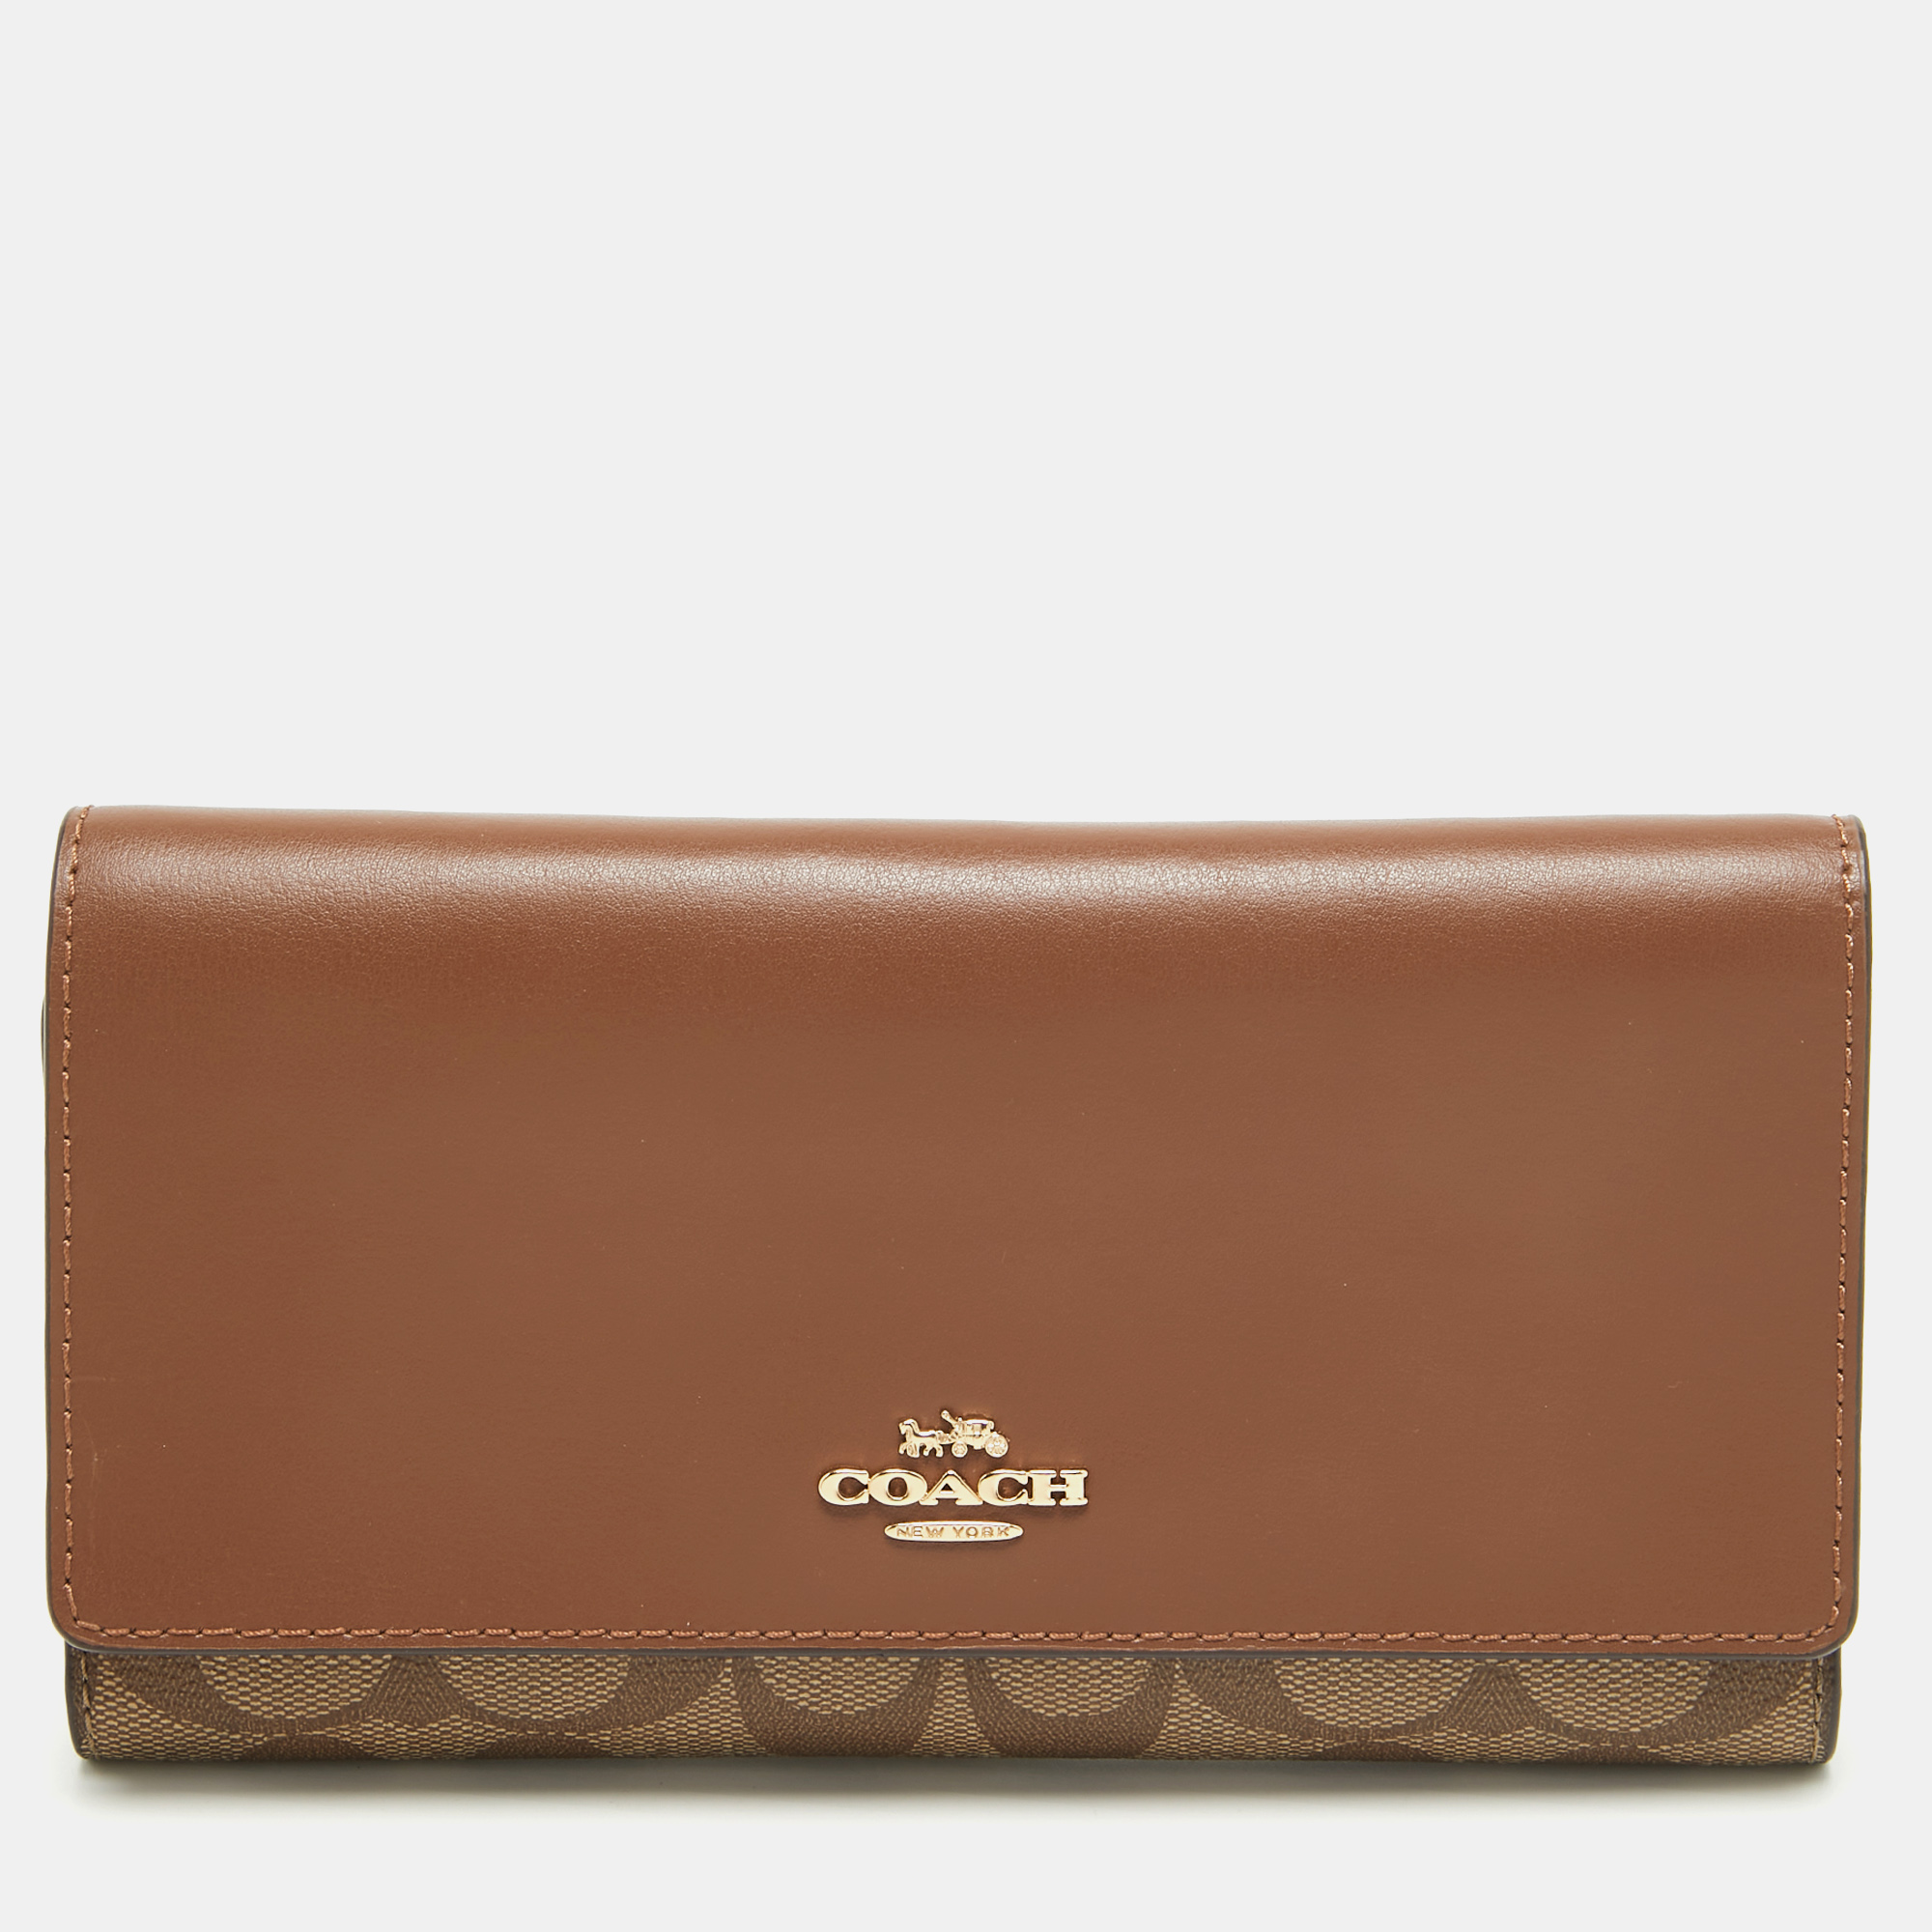 Coach brown/beige signature coated canvas and leather trifold long wallet